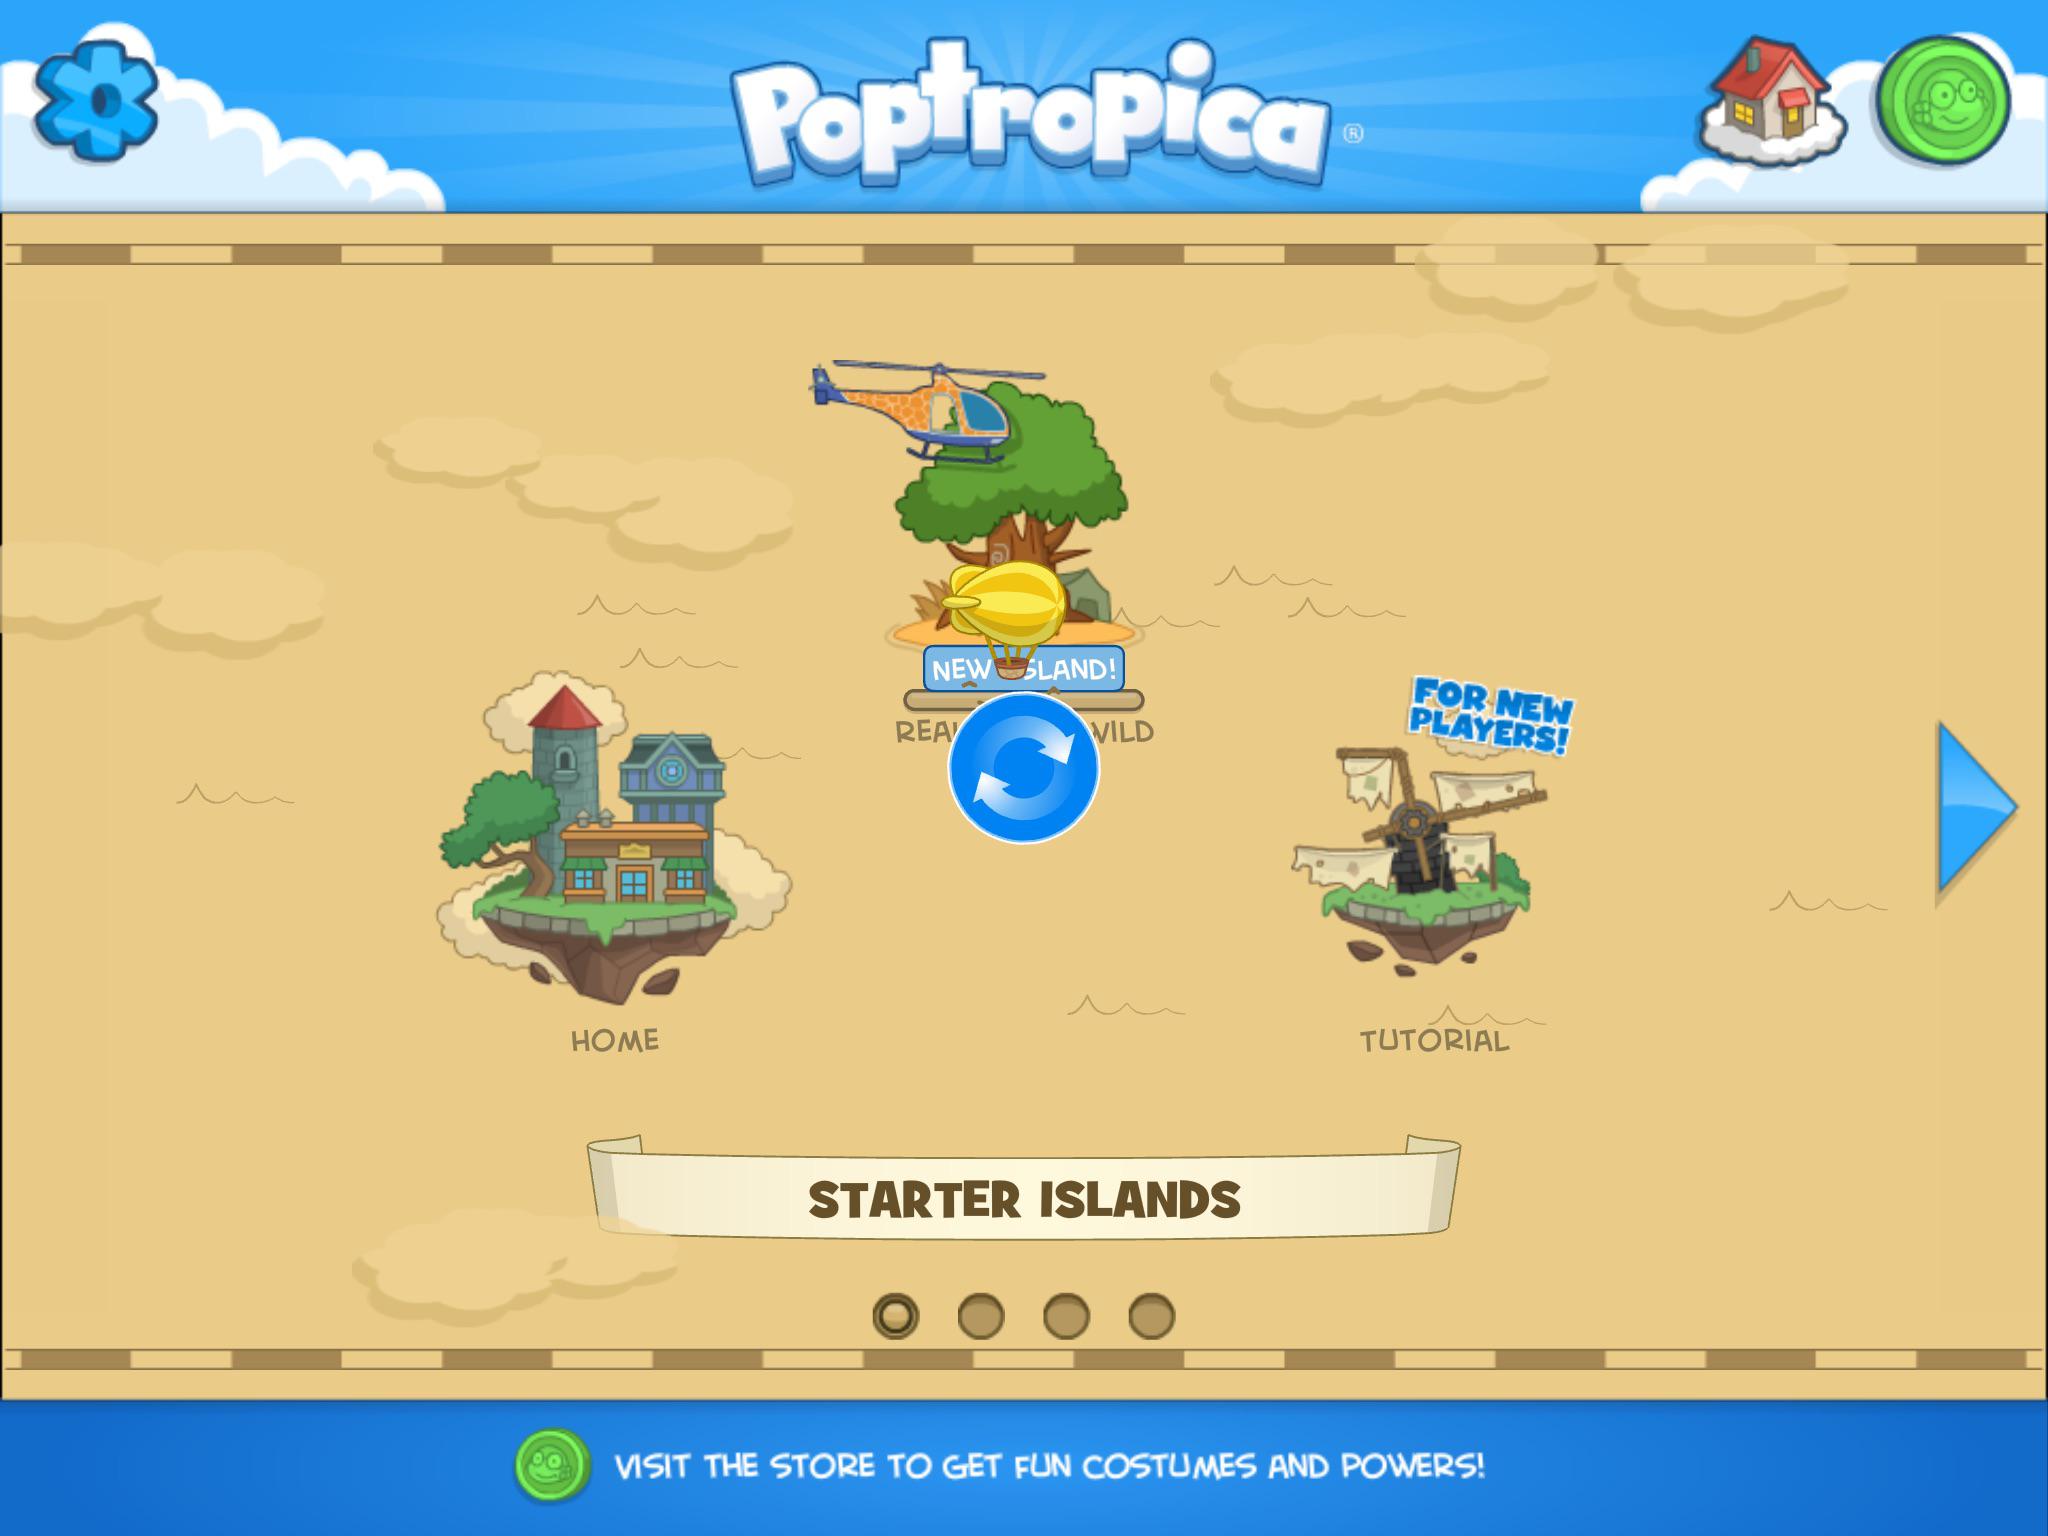 Can someone help? I'm playing on my iPad with the poptropica app and I can't seem to get into the wild safari map. weirdly, it only appears when I'm offline, but once